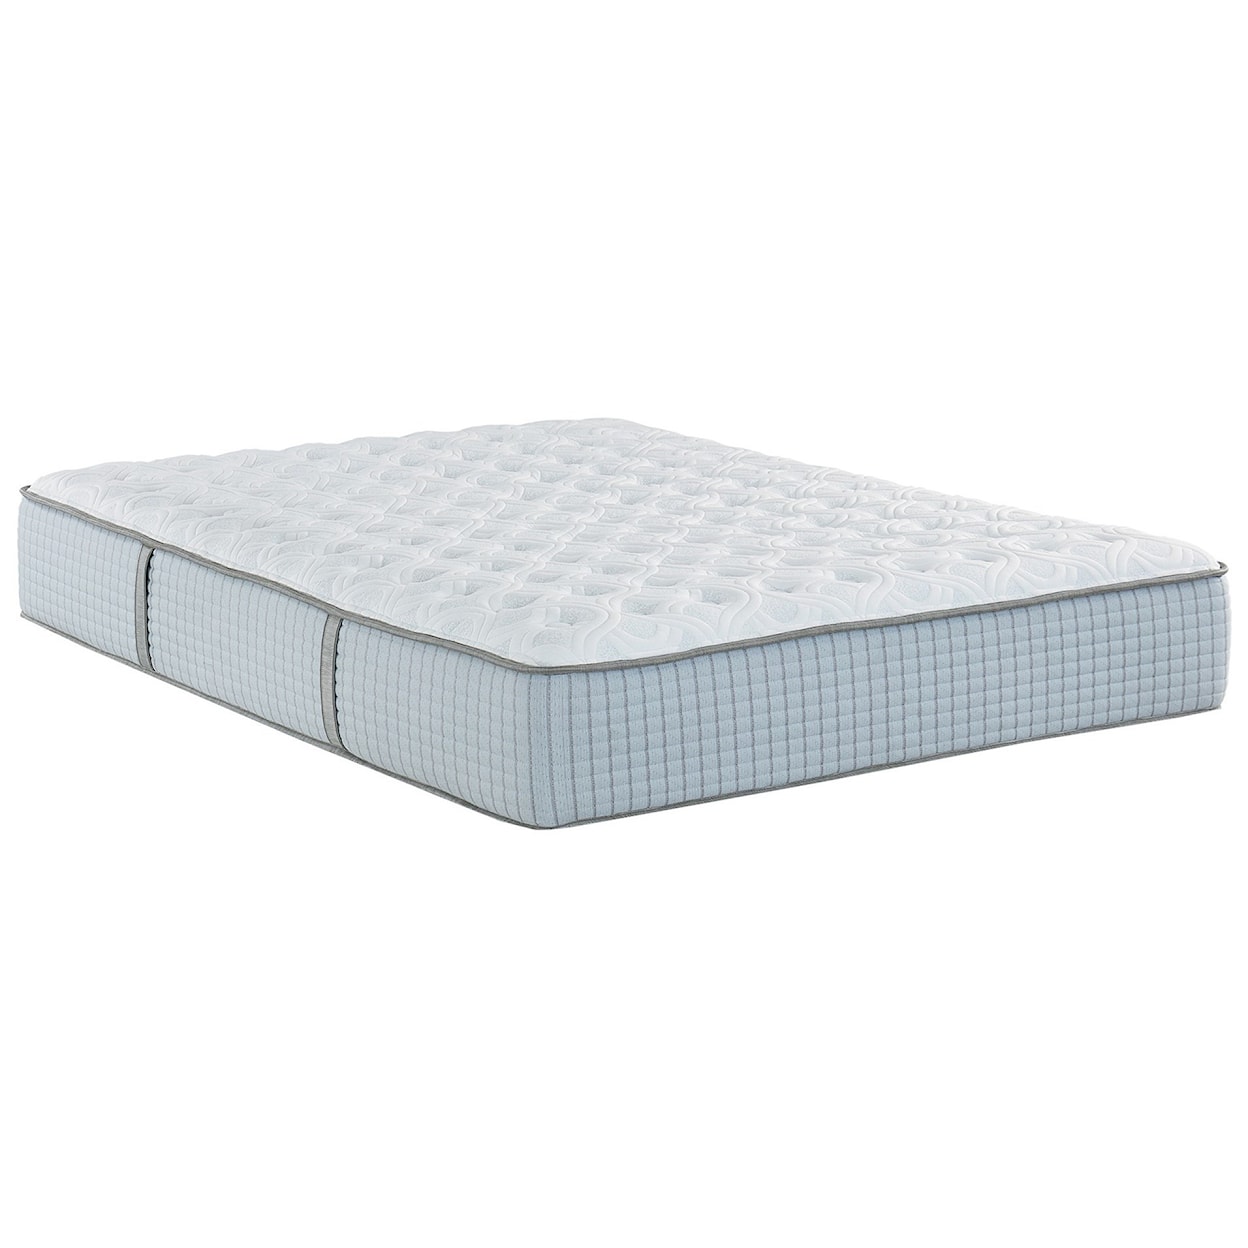 Restonic Chantelle Extra Firm King Extra Firm 2-Sided Mattress